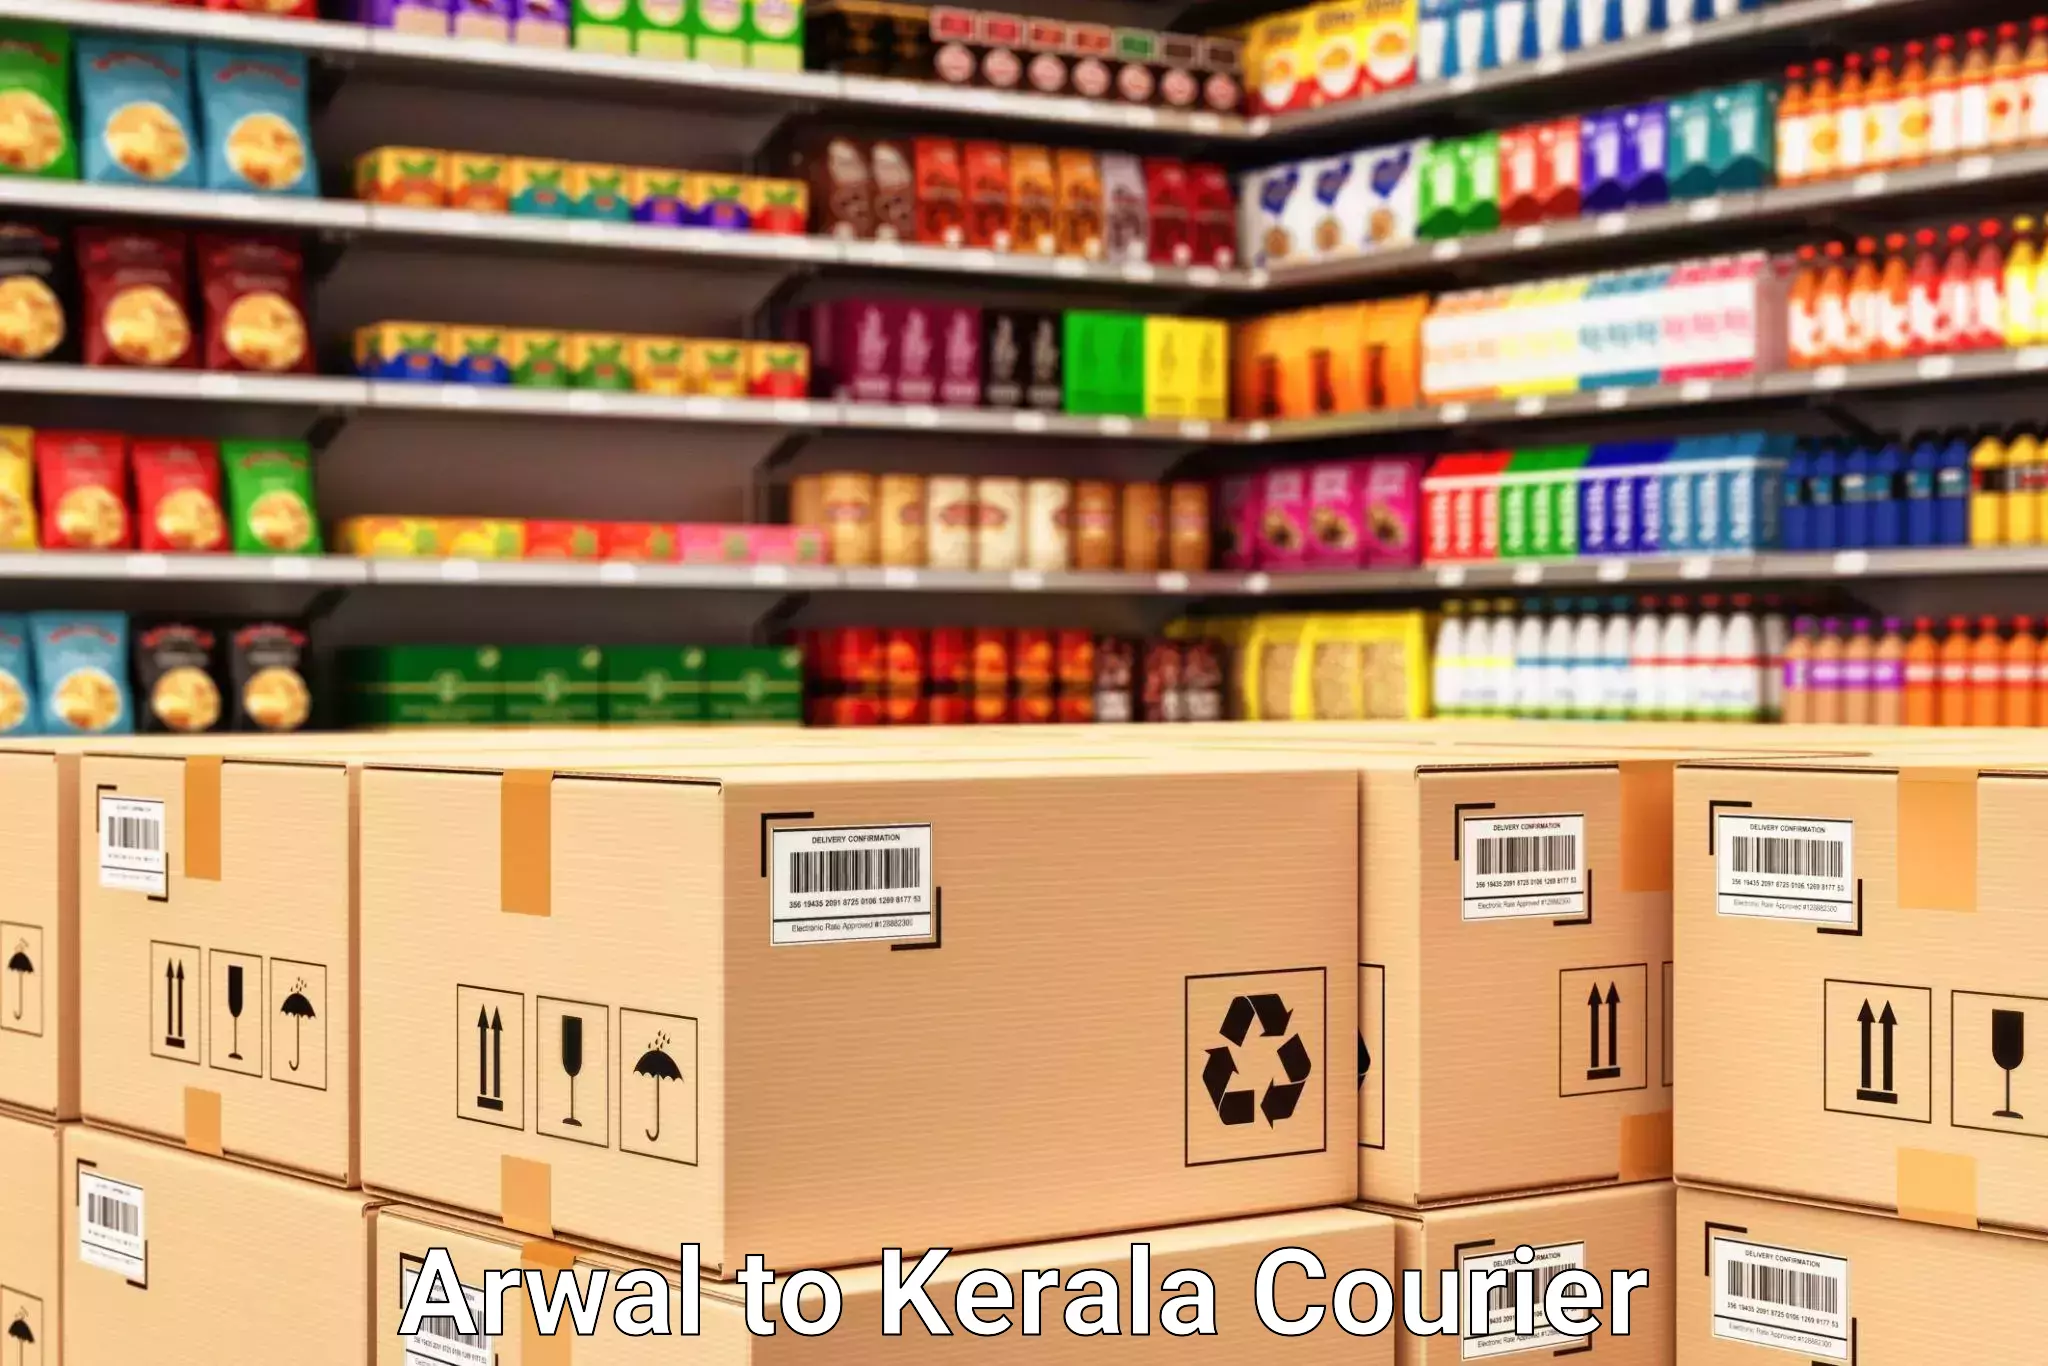 Automated luggage transport Arwal to Kerala